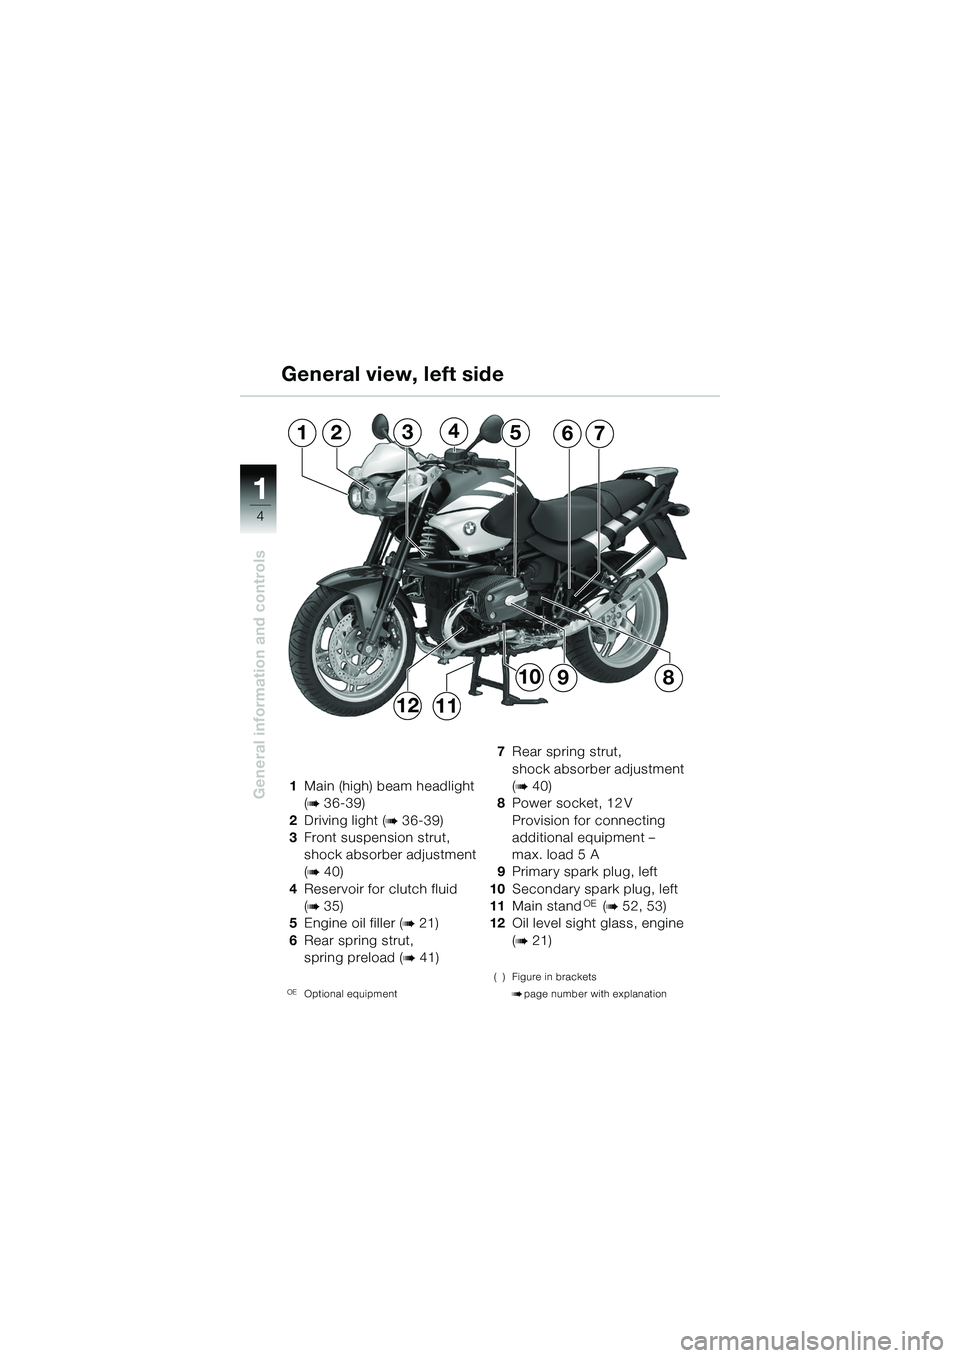 BMW MOTORRAD R 1150 R 2002  Riders Manual (in English) 1
General information and controls
4
1Main (high) beam headlight 
(
b 36-39)
2 Driving light (
b 36-39)
3 Front suspension strut, 
shock absorber adjustment 
(
b 40)
4 Reservoir for clutch fluid
(
b 3